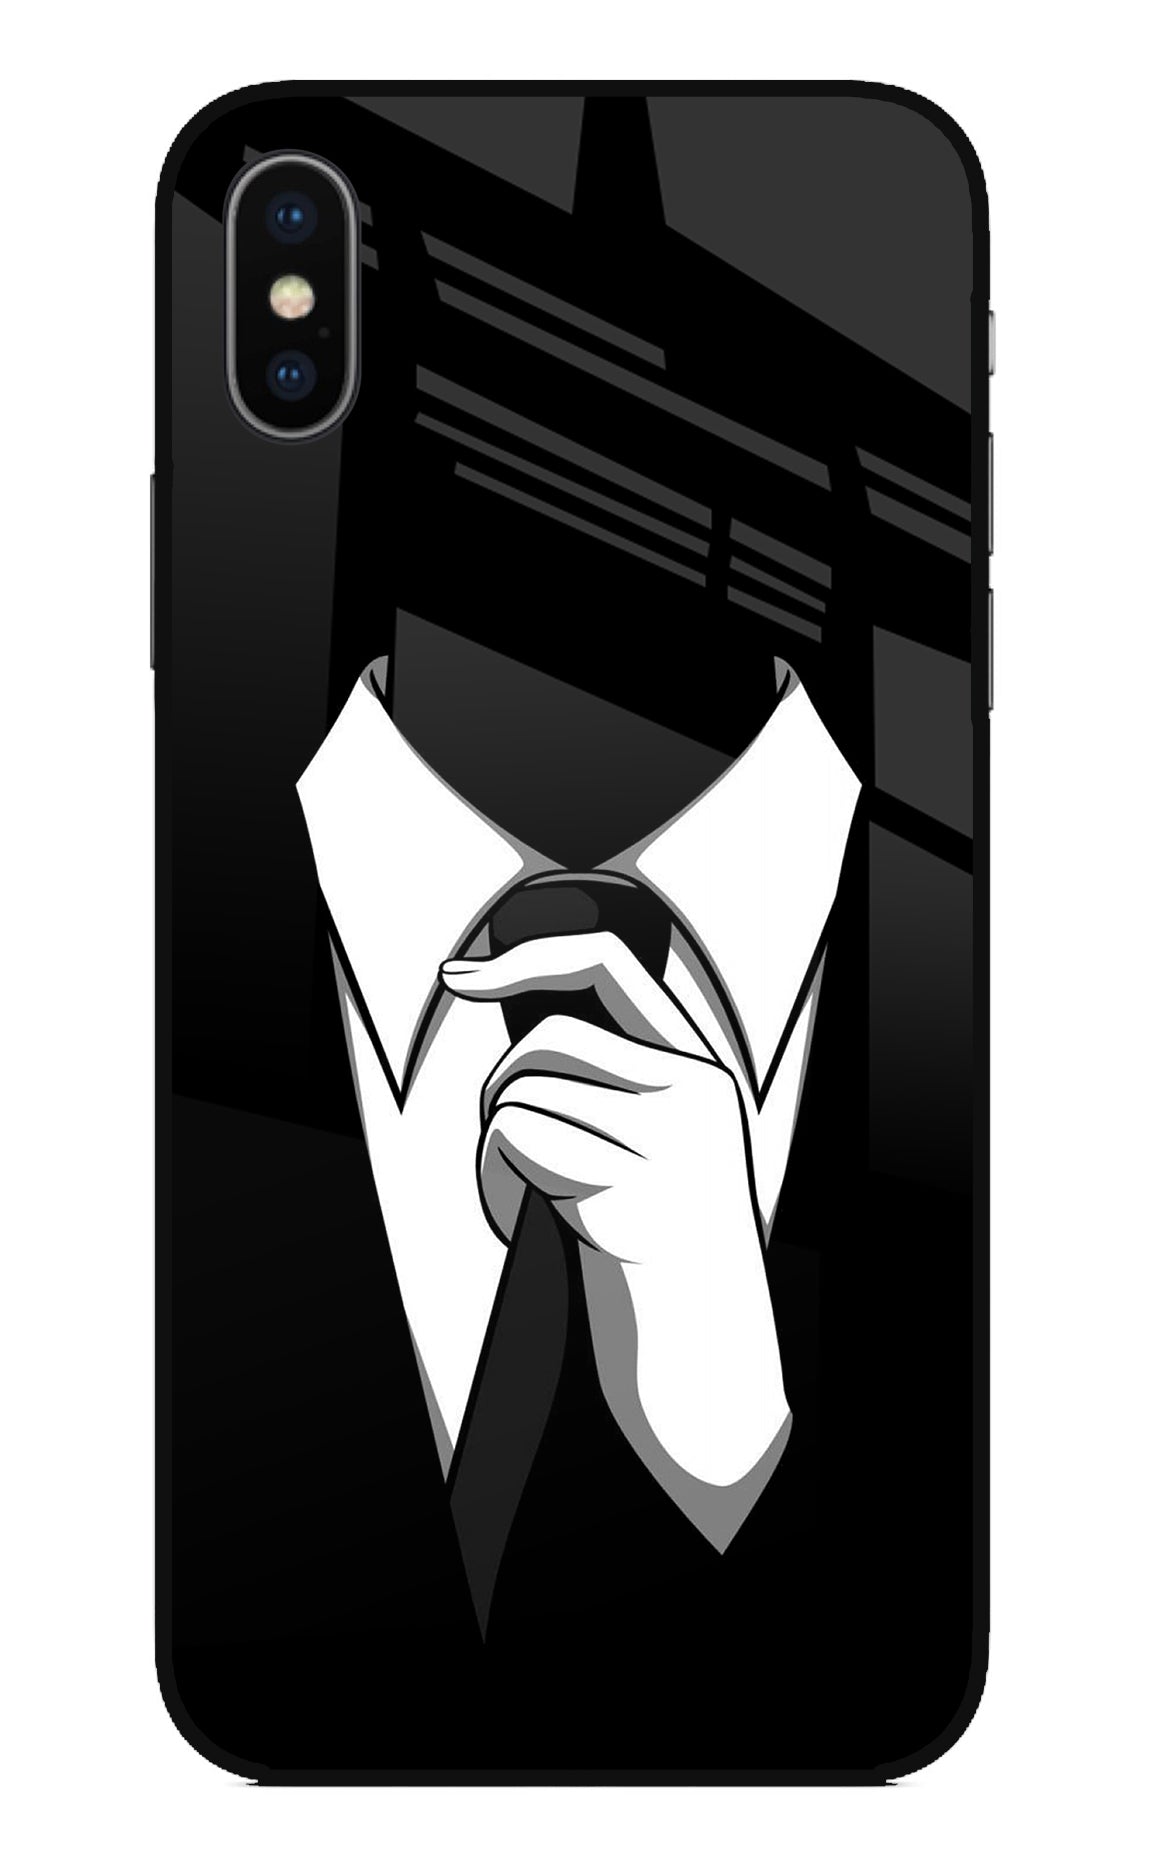 Black Tie iPhone X Back Cover